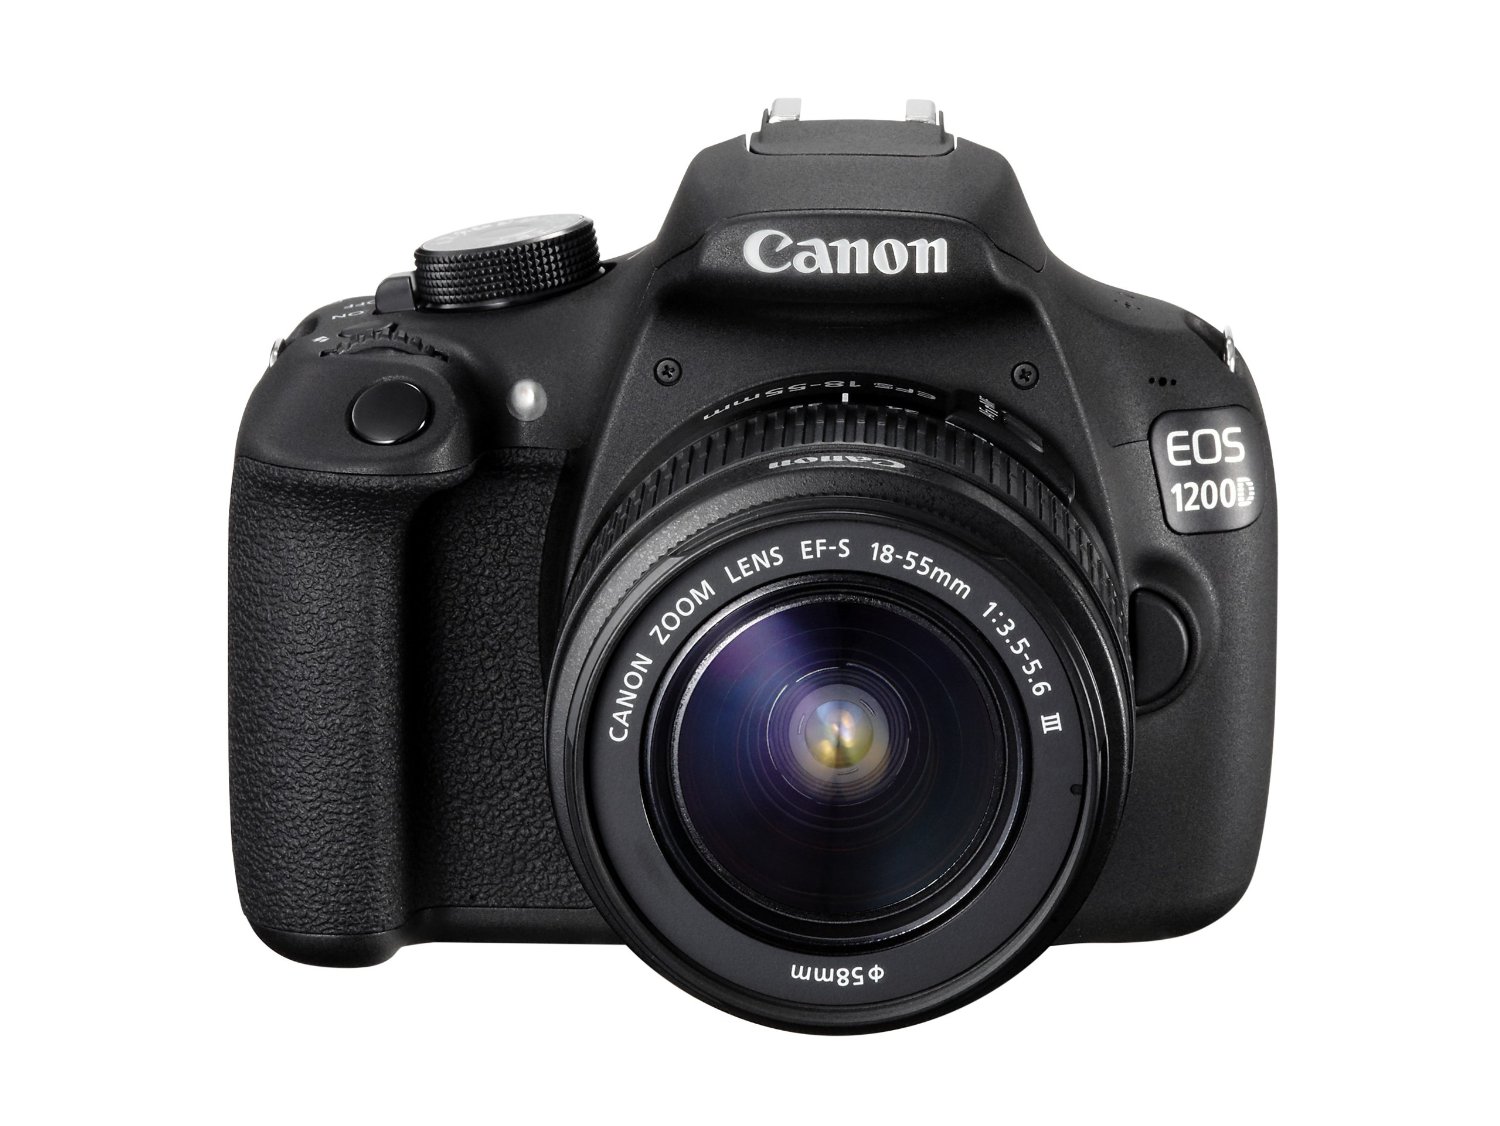 Canon EOS 1200D Digital SLR Camera with EF-S 18-55 mm